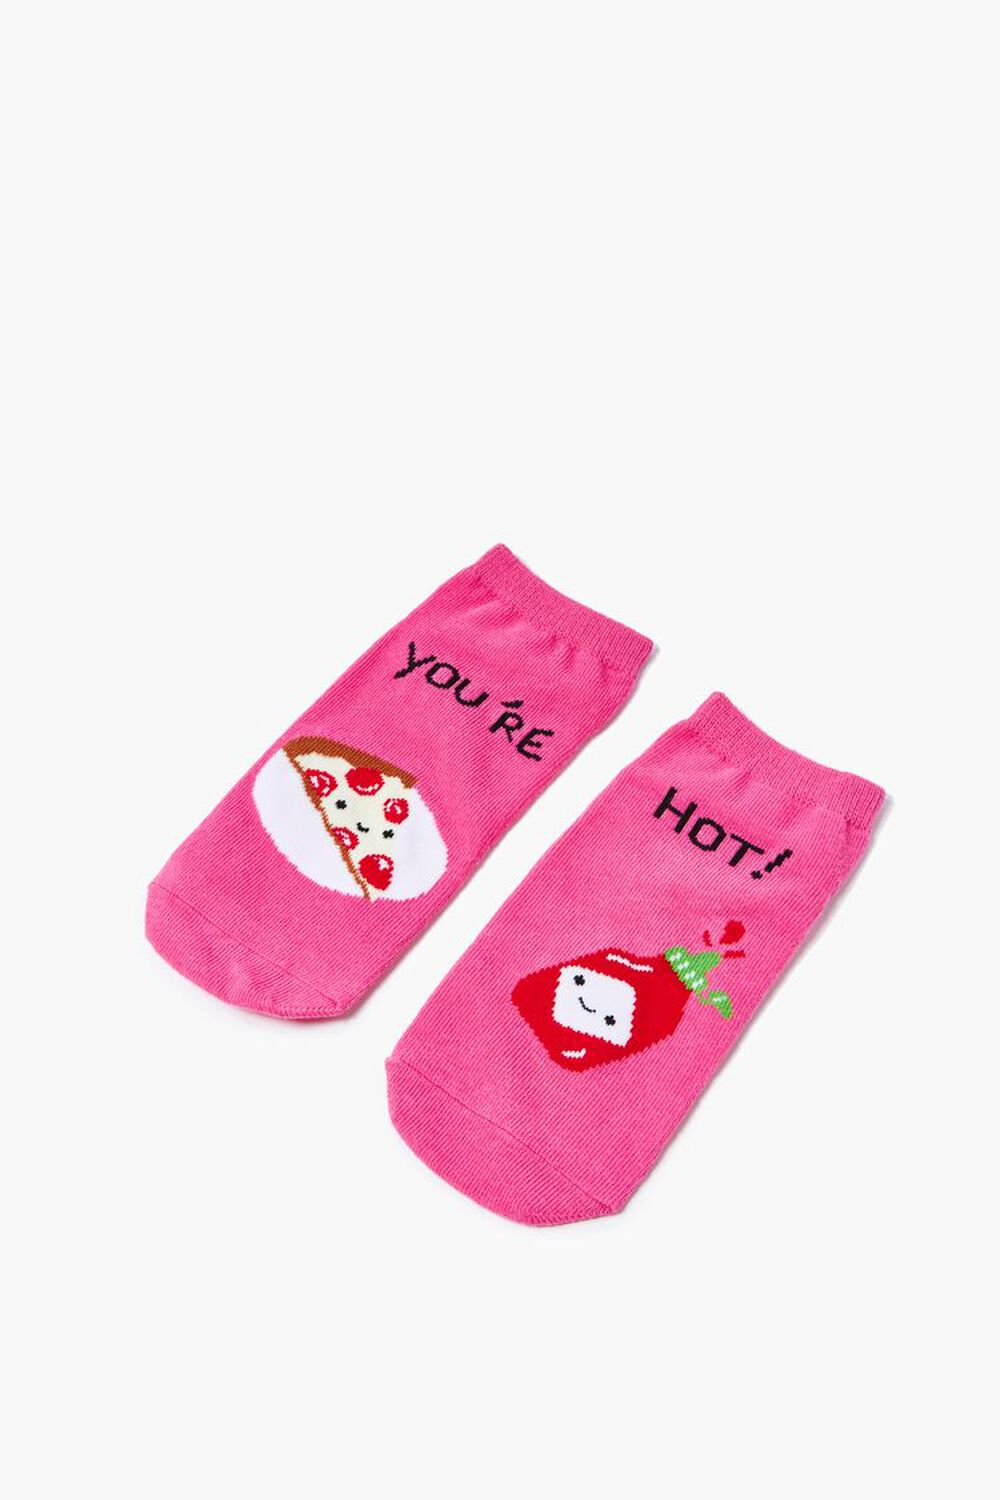 PINK/MULTI Youre Hot Ankle Socks, image 1